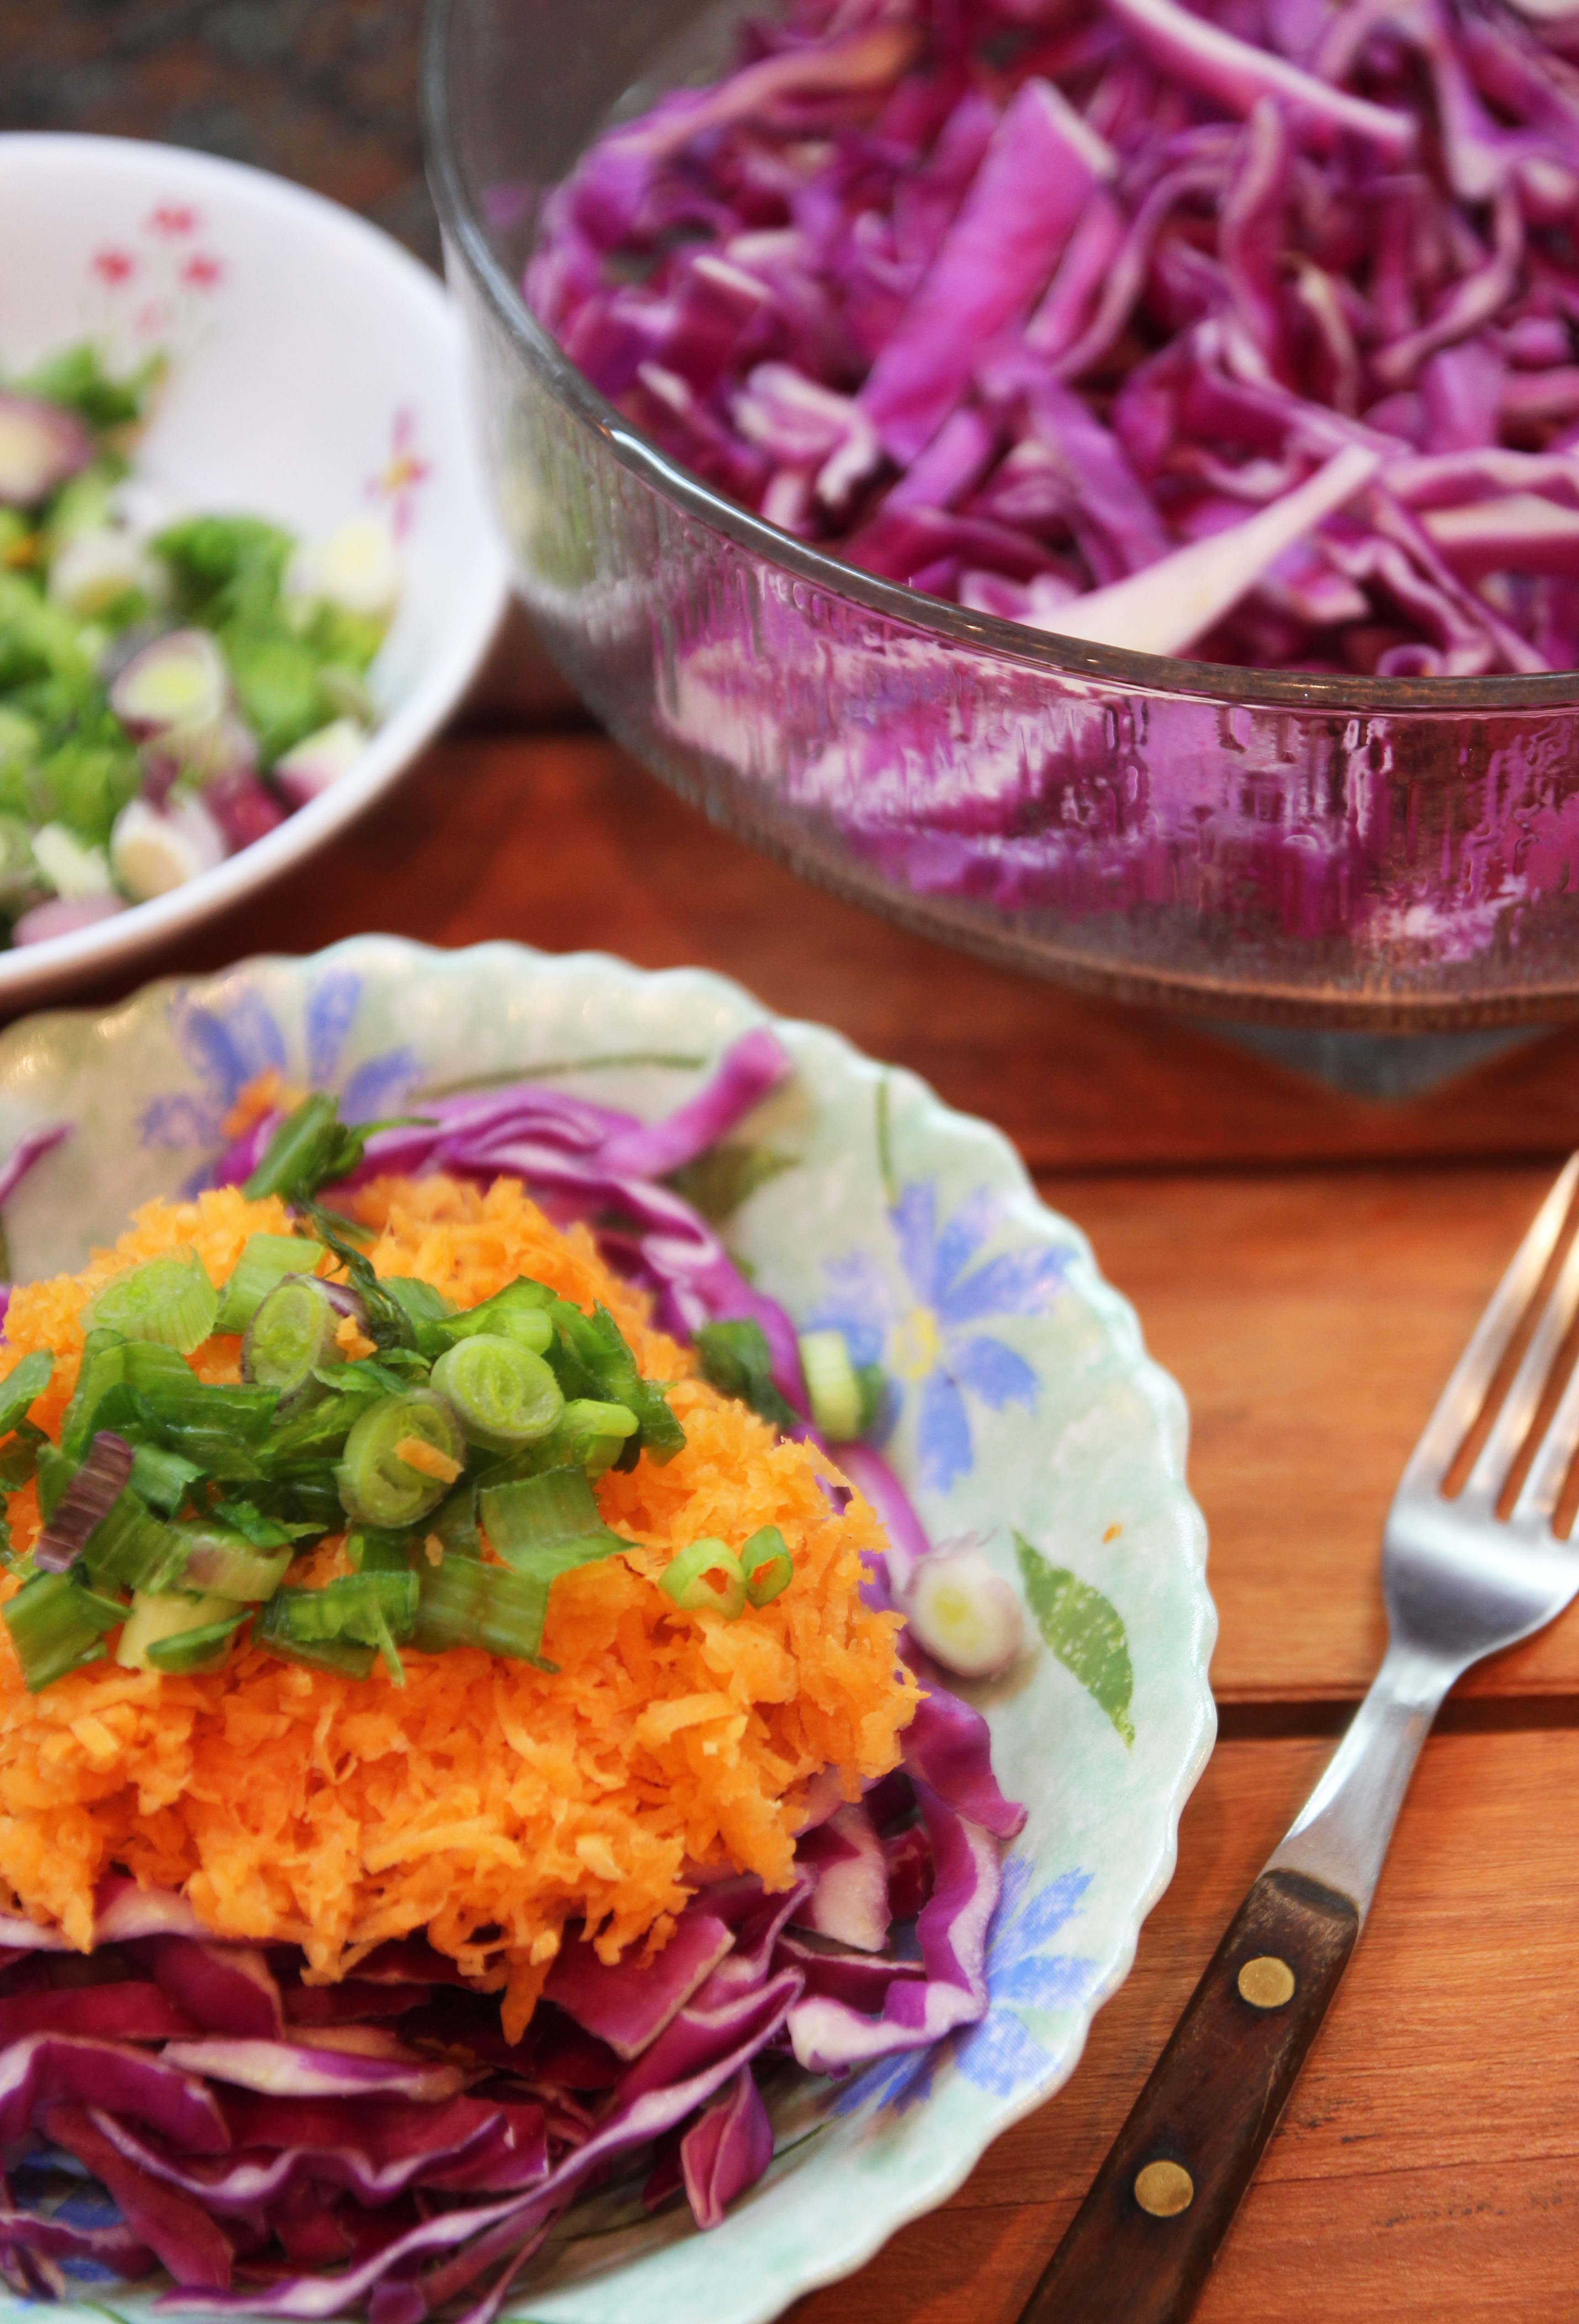 Spring Onion, Red Cabbage & Carrot Salad8